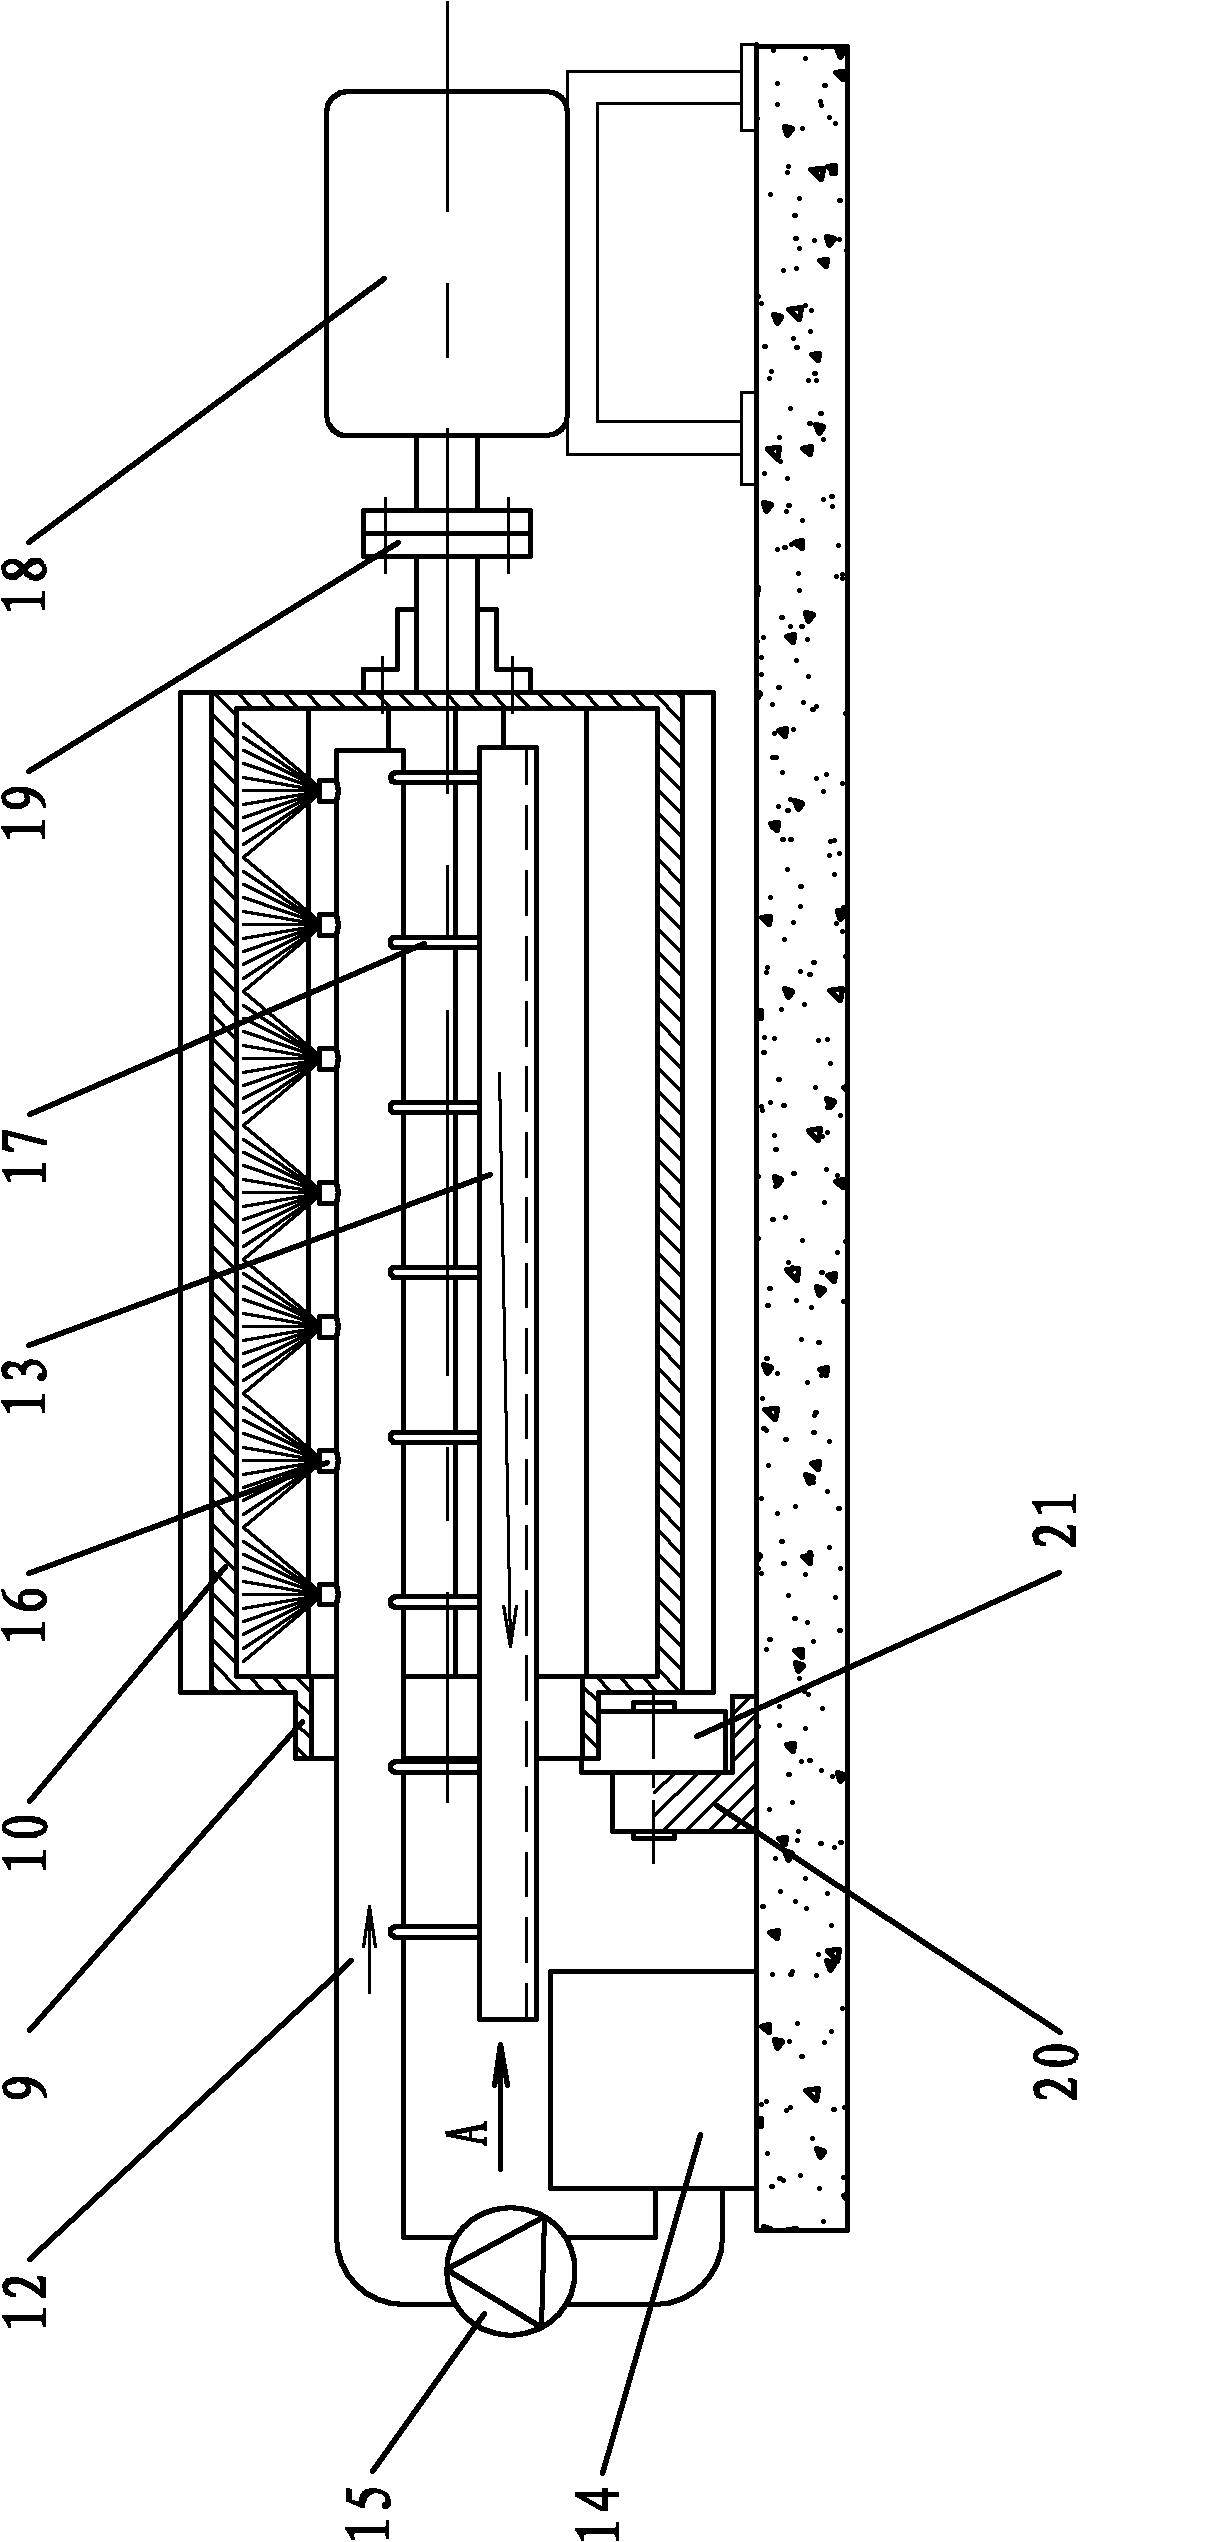 Dry granulation and afterheat recovery system of blast-furnace slag